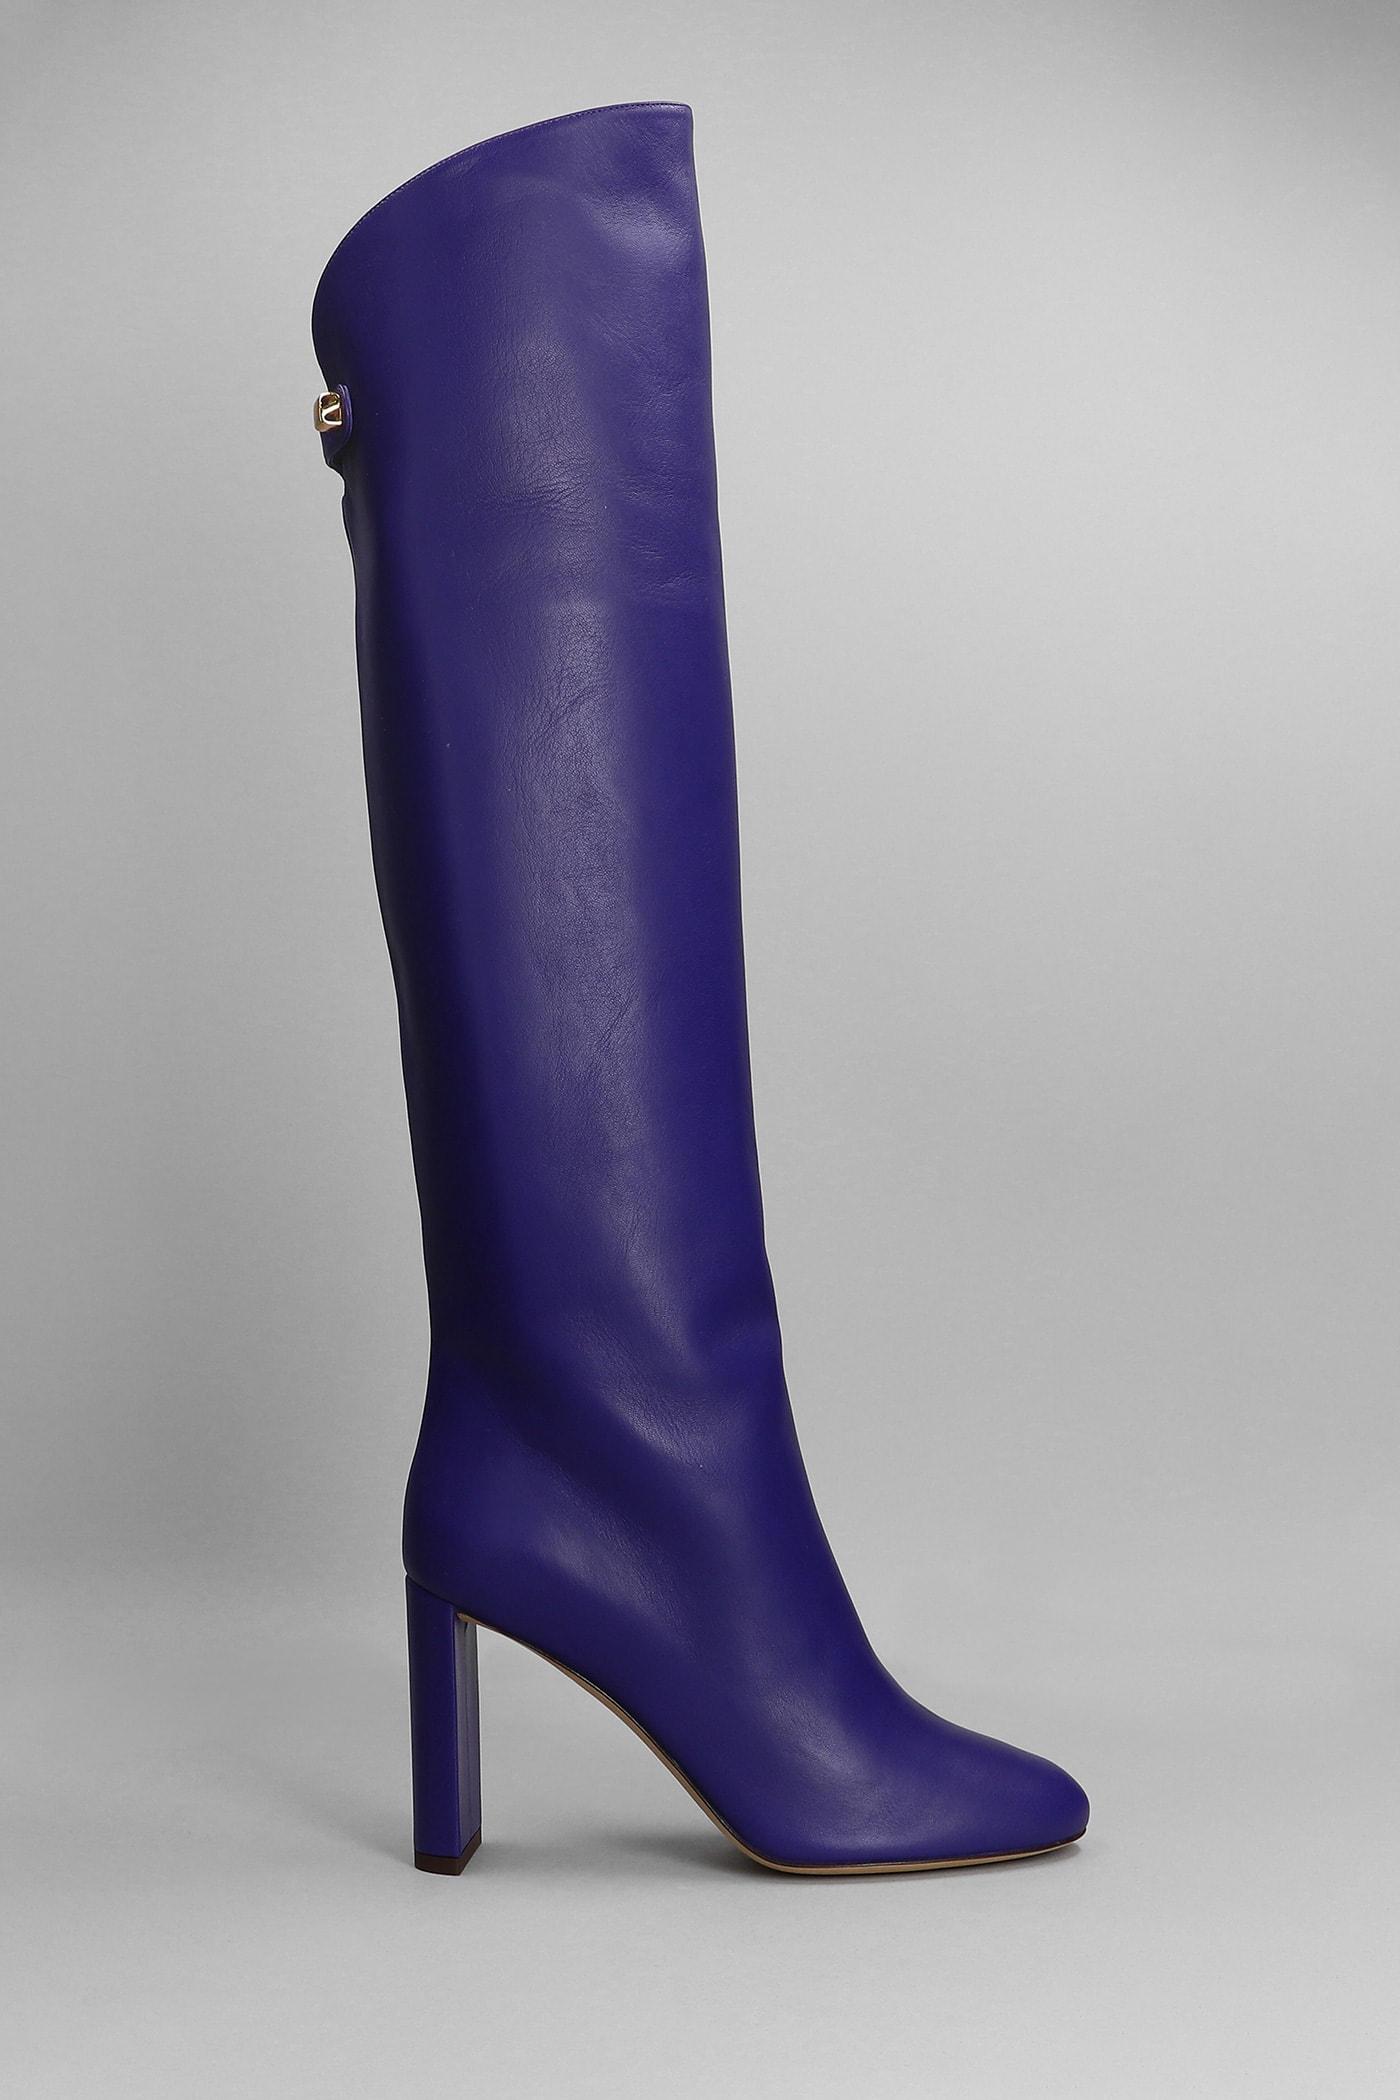 Maison Skorpios Adriana High Heels Boots In Viola Leather in Blue | Lyst